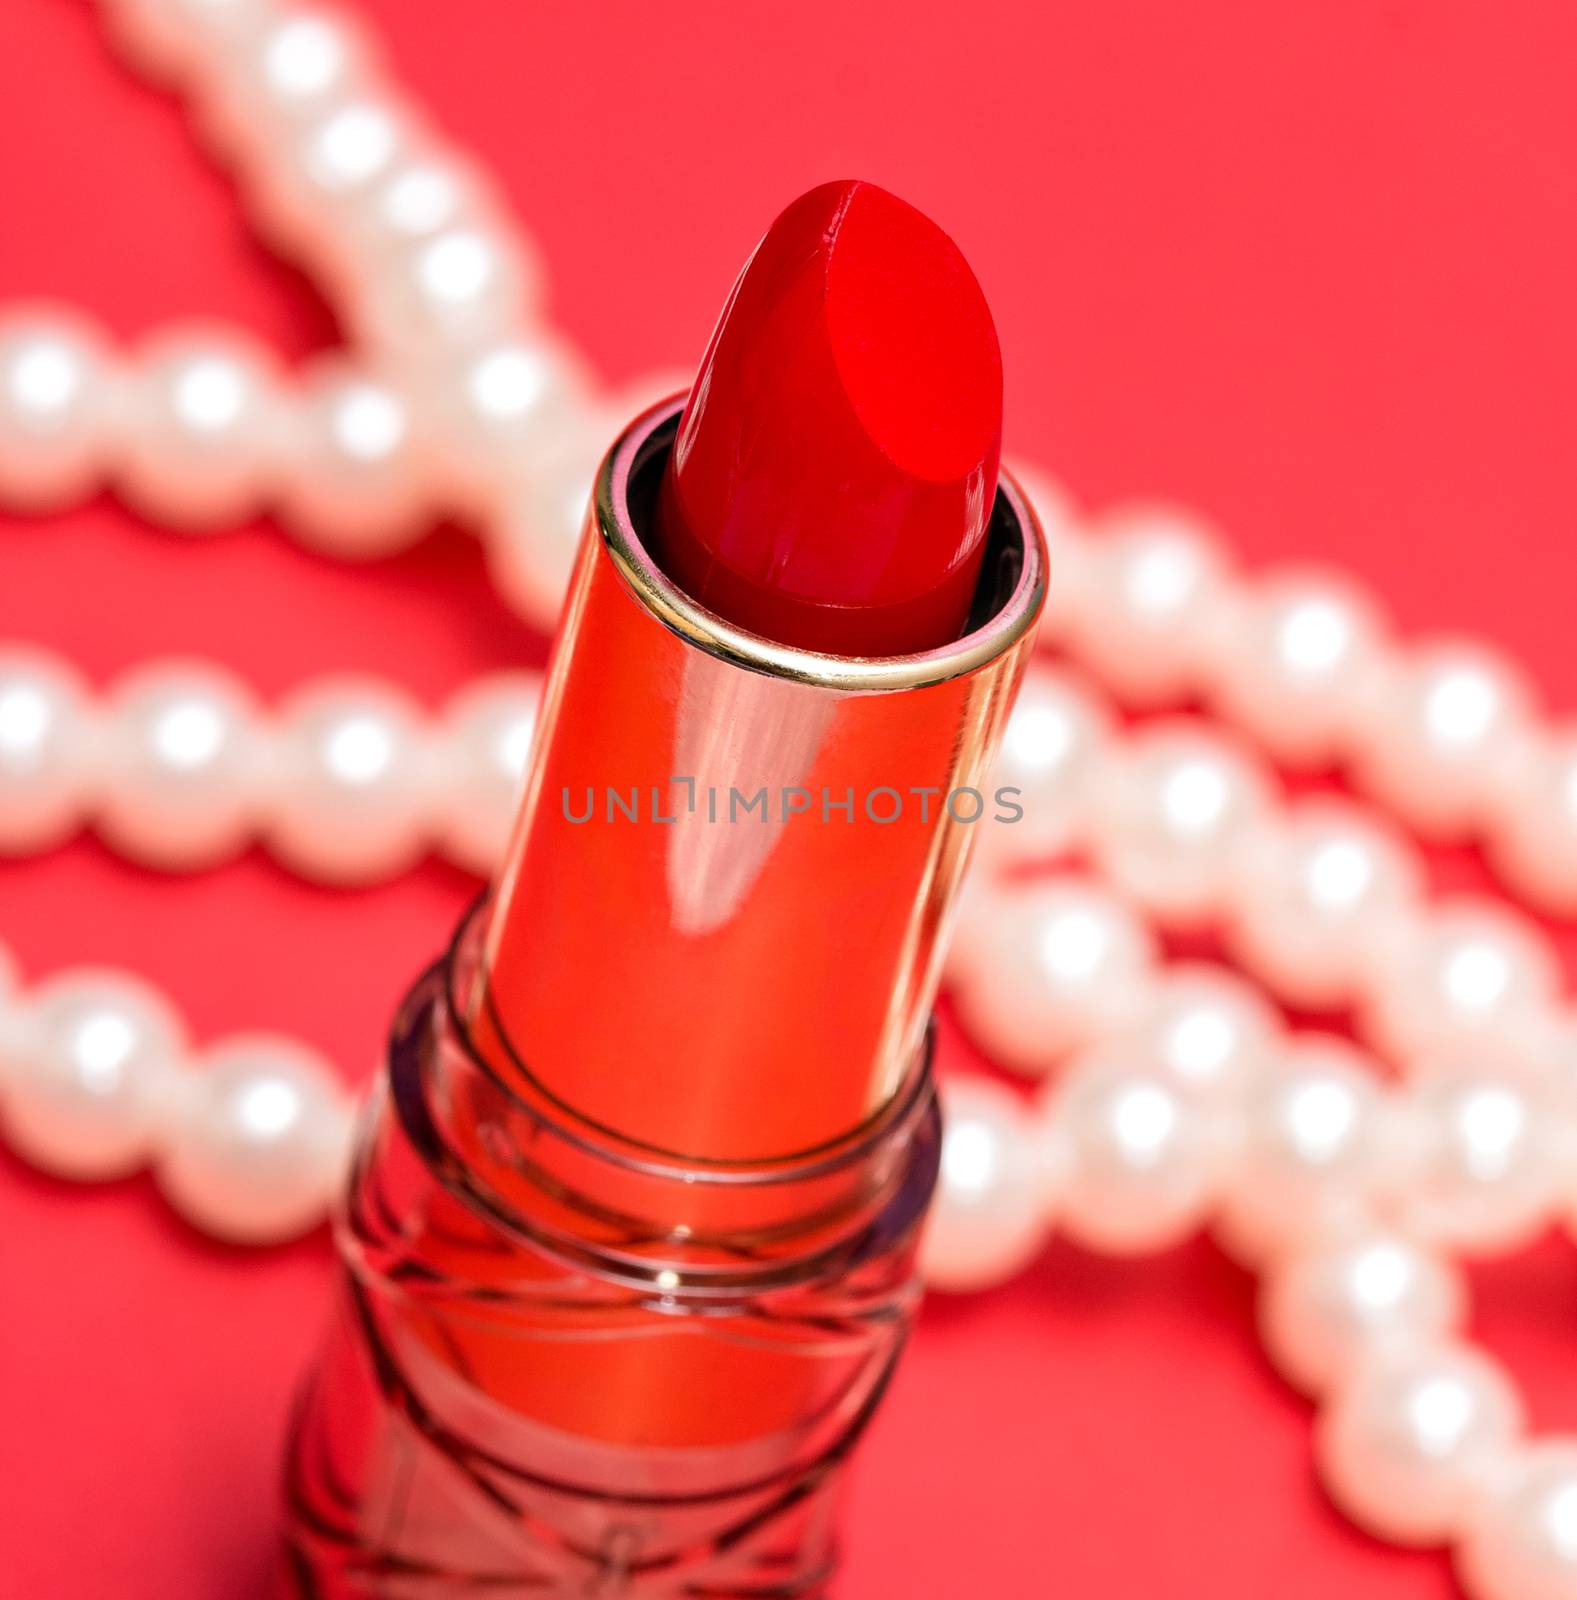 Makeup Lipstick Represents Beauty Product And Cosmetic  by stuartmiles